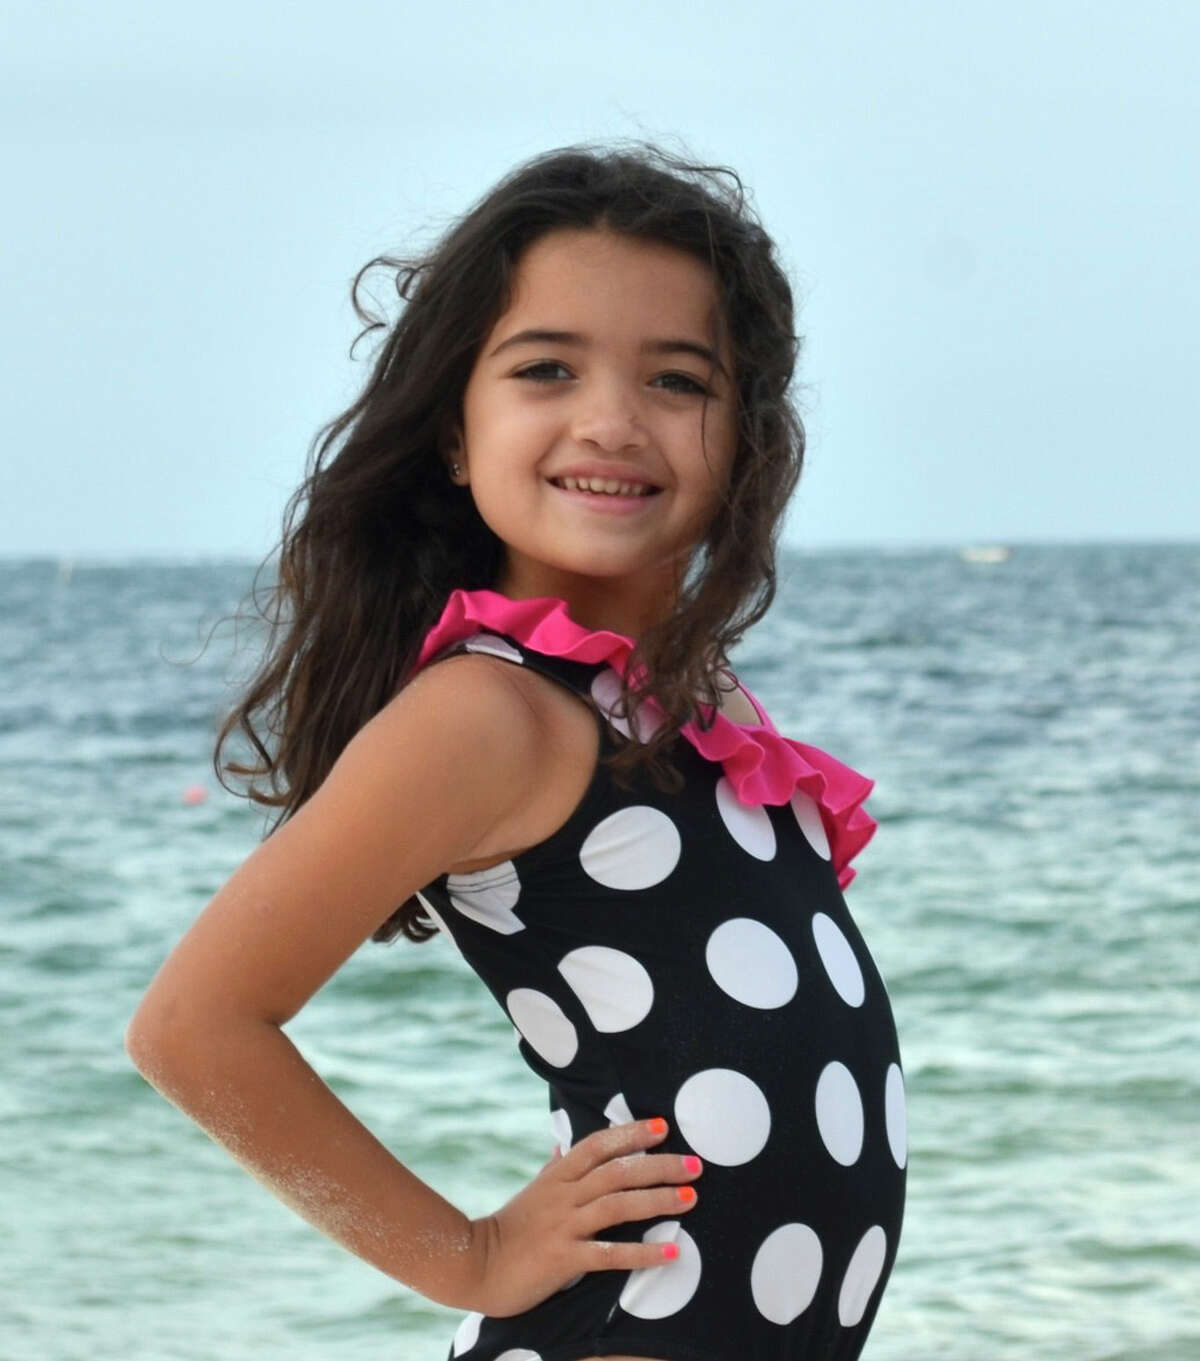 A Galveston family is suing their health insurer after their 6-year-old, Isabella Mia Tolentino, died of complications from appendicitis.